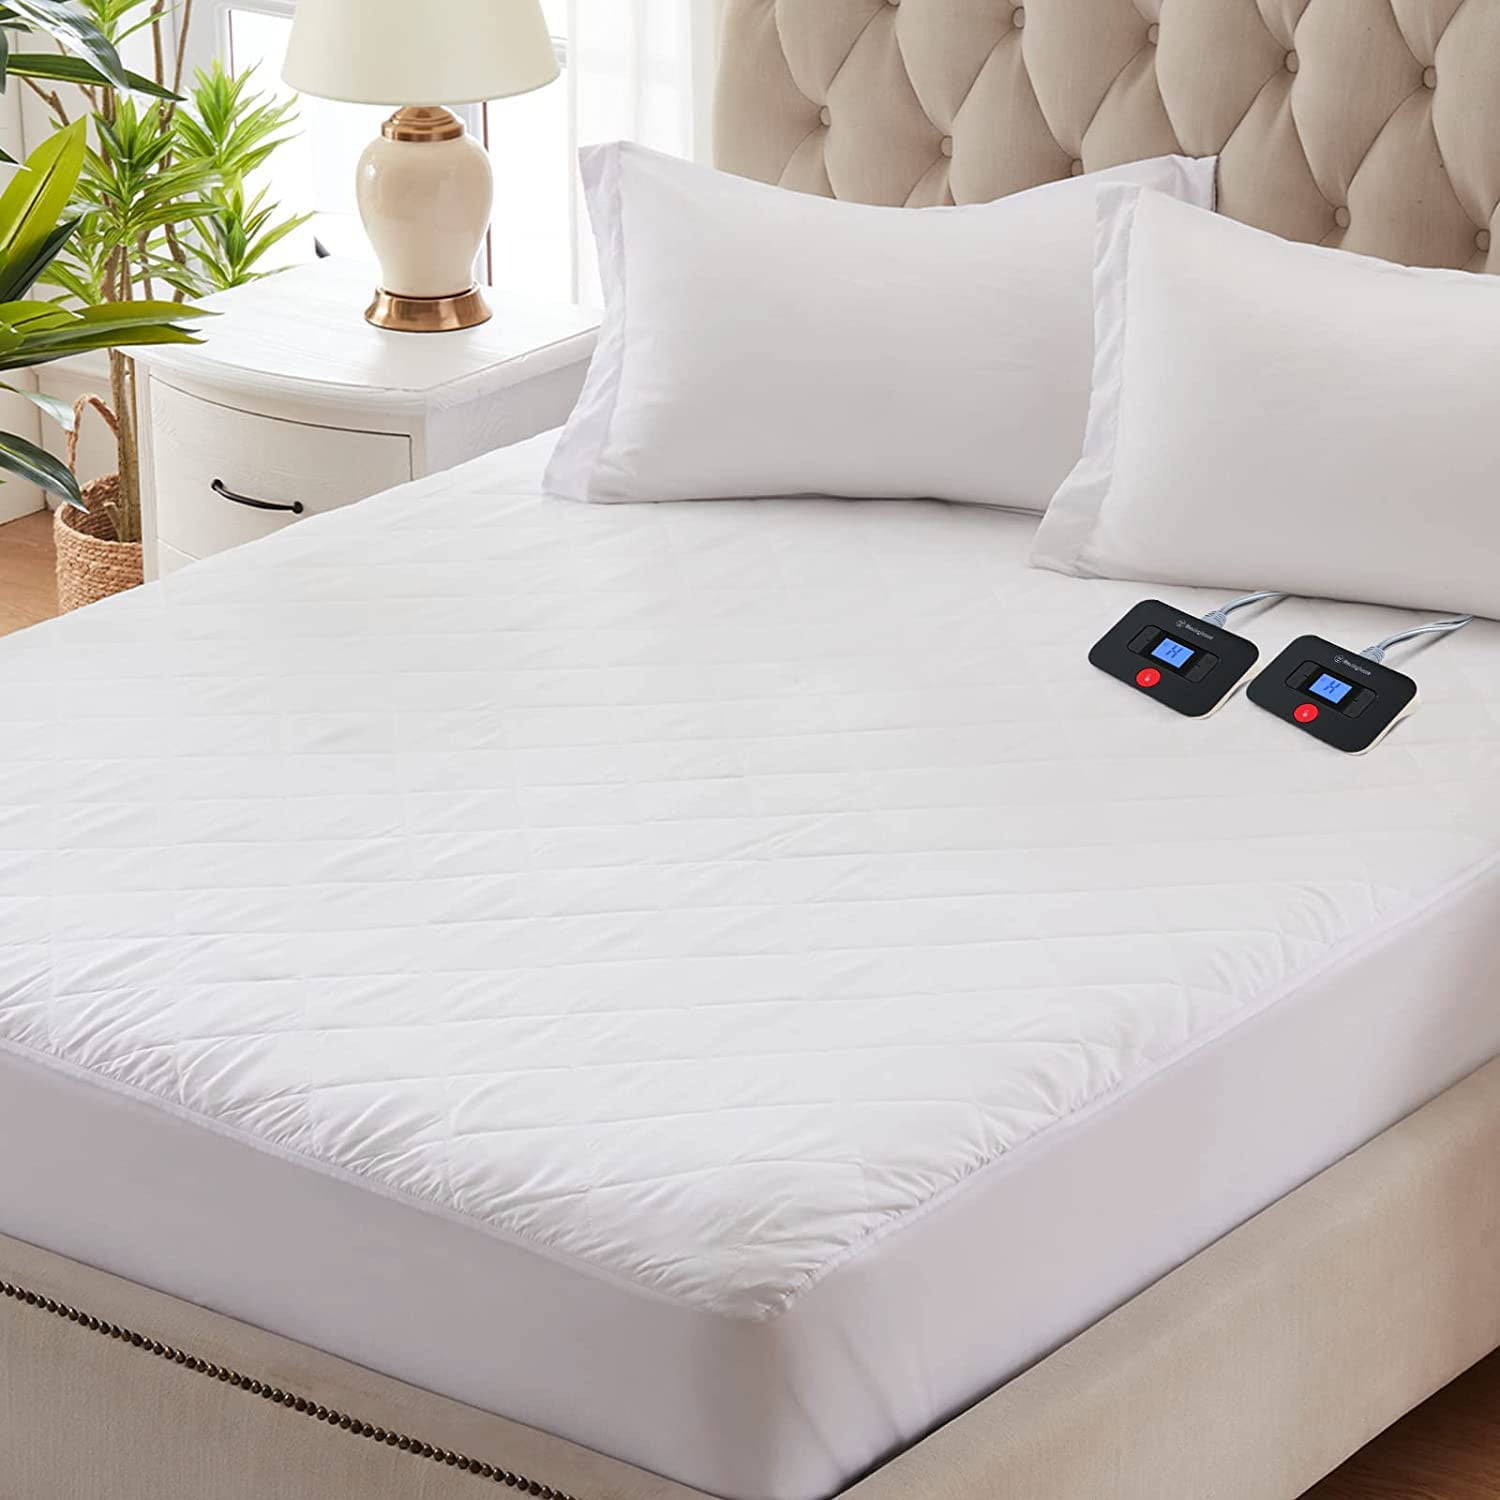 Sunbeam Full Sized Mattress Pad with Wi-Fi and Heated Body Pillow